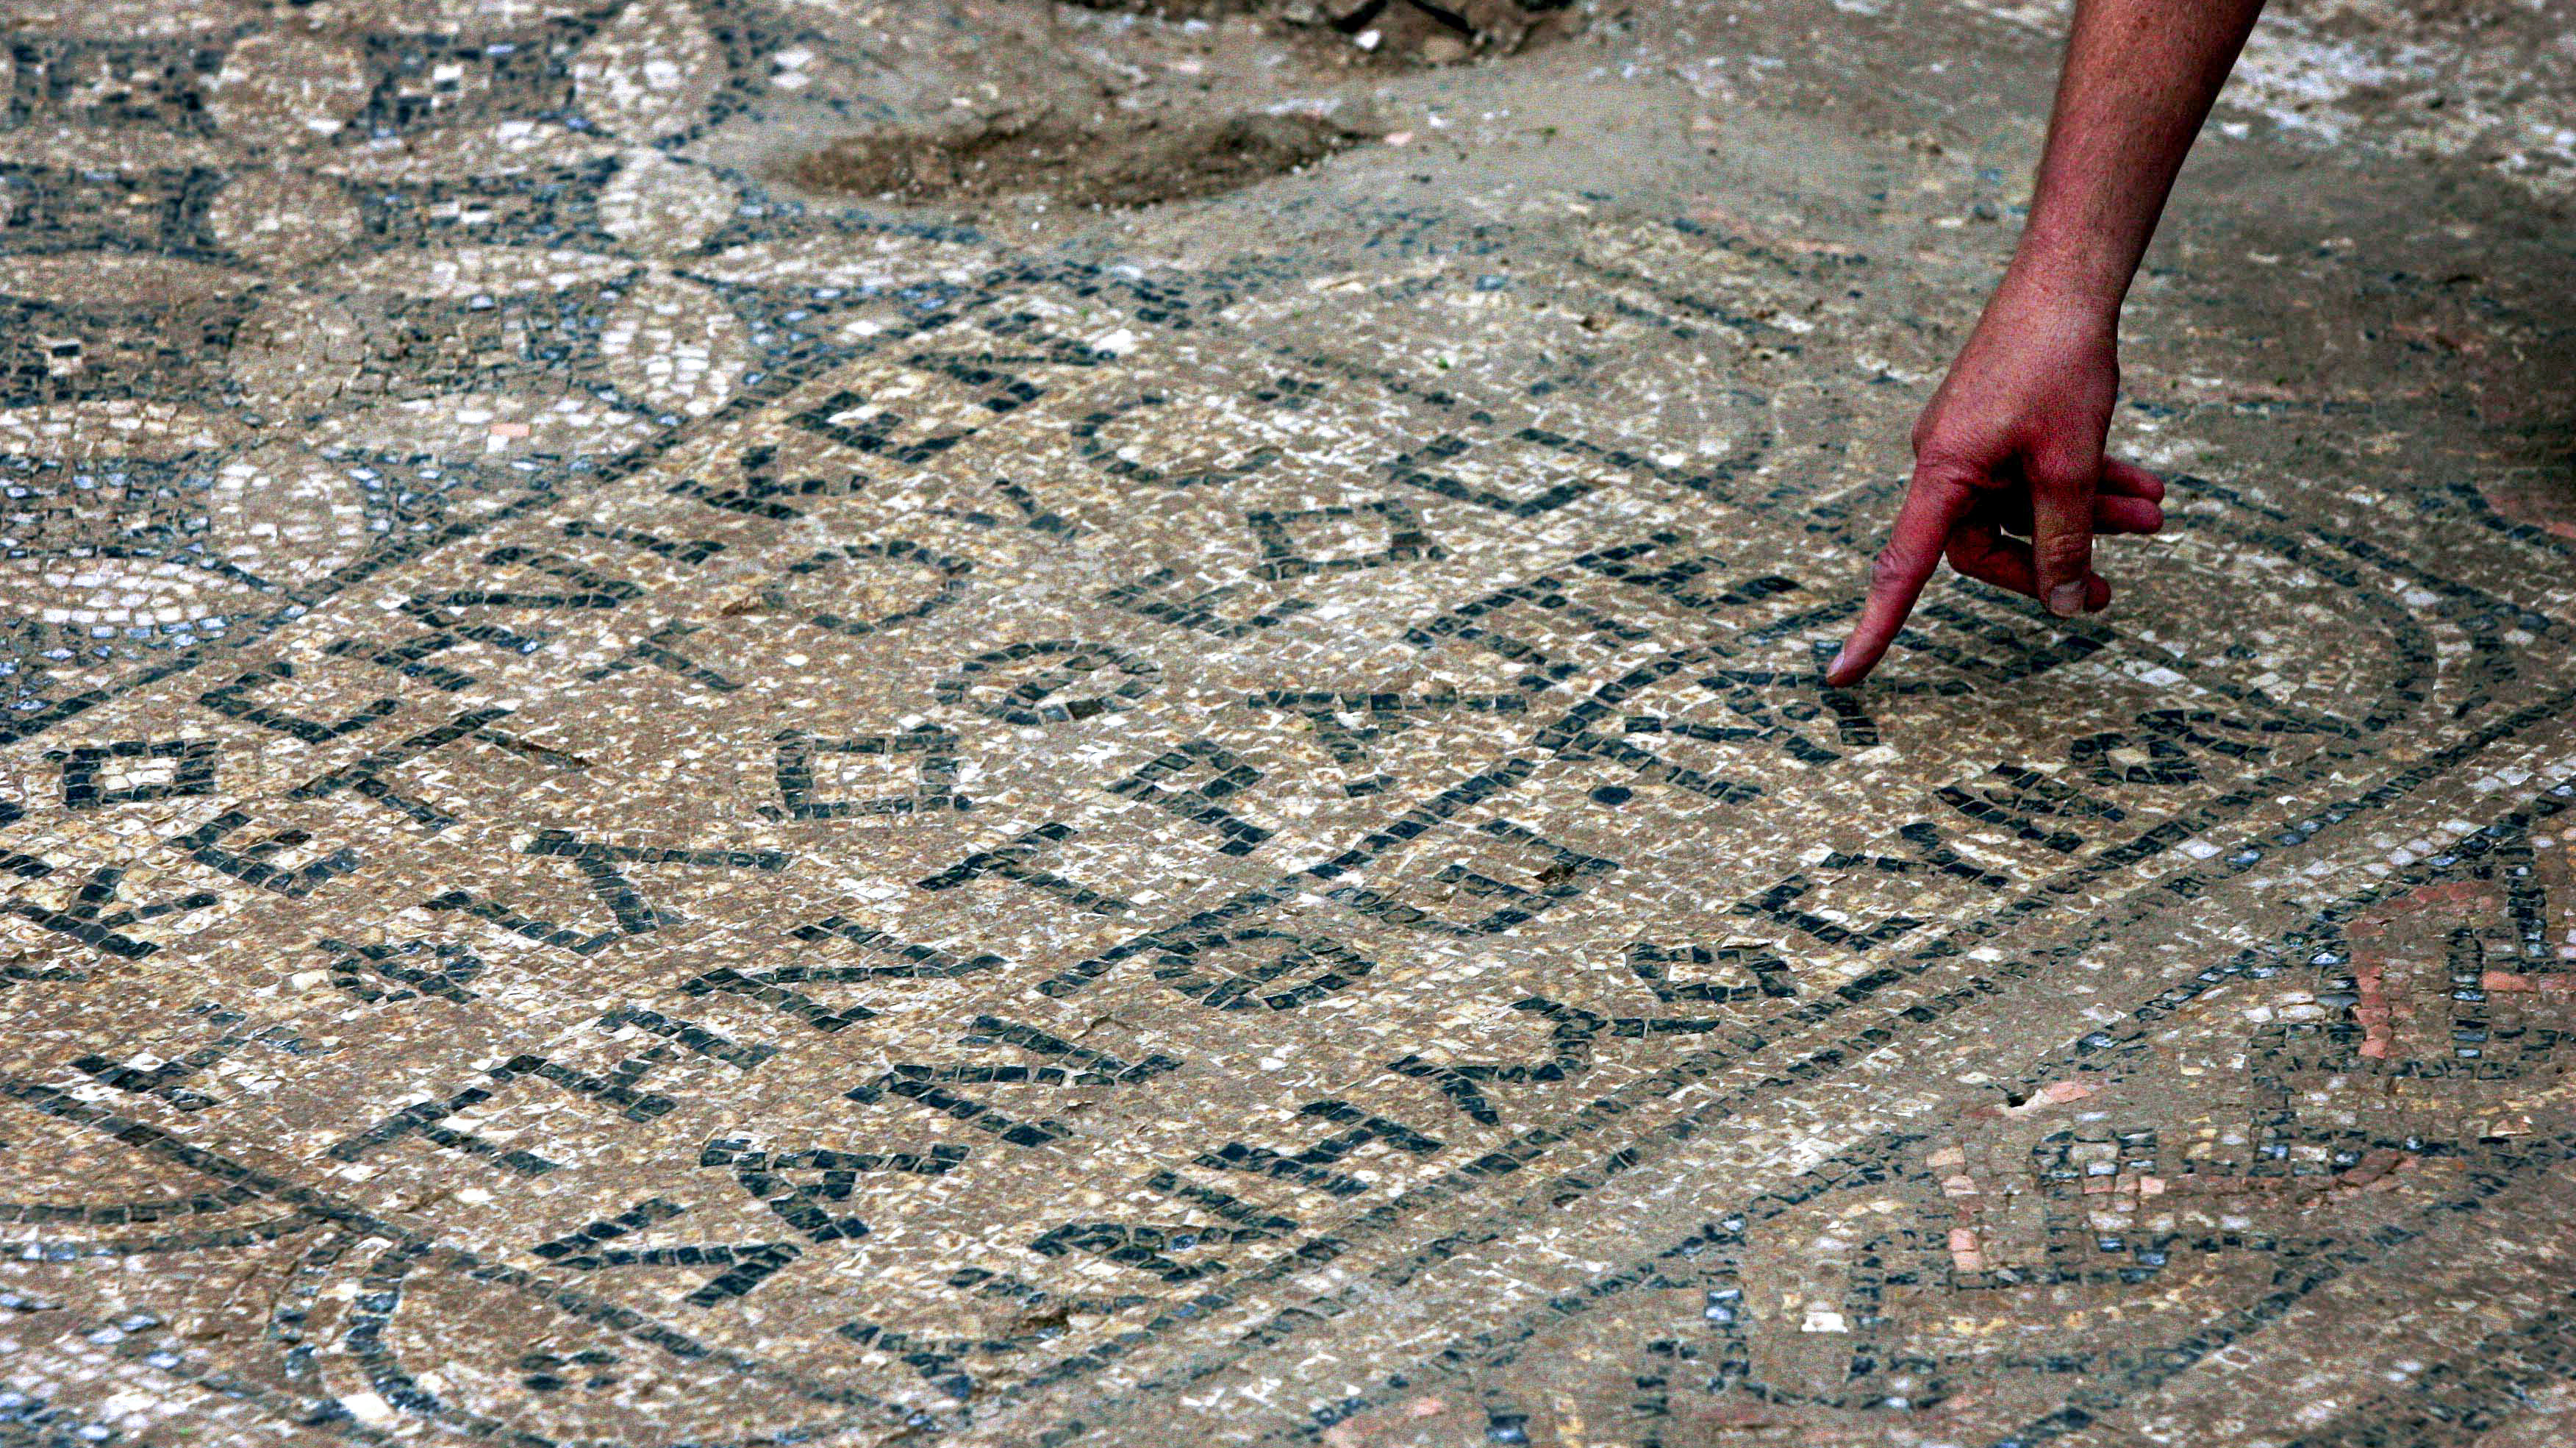 Man pointing to ancient Greek text written in the mosaic